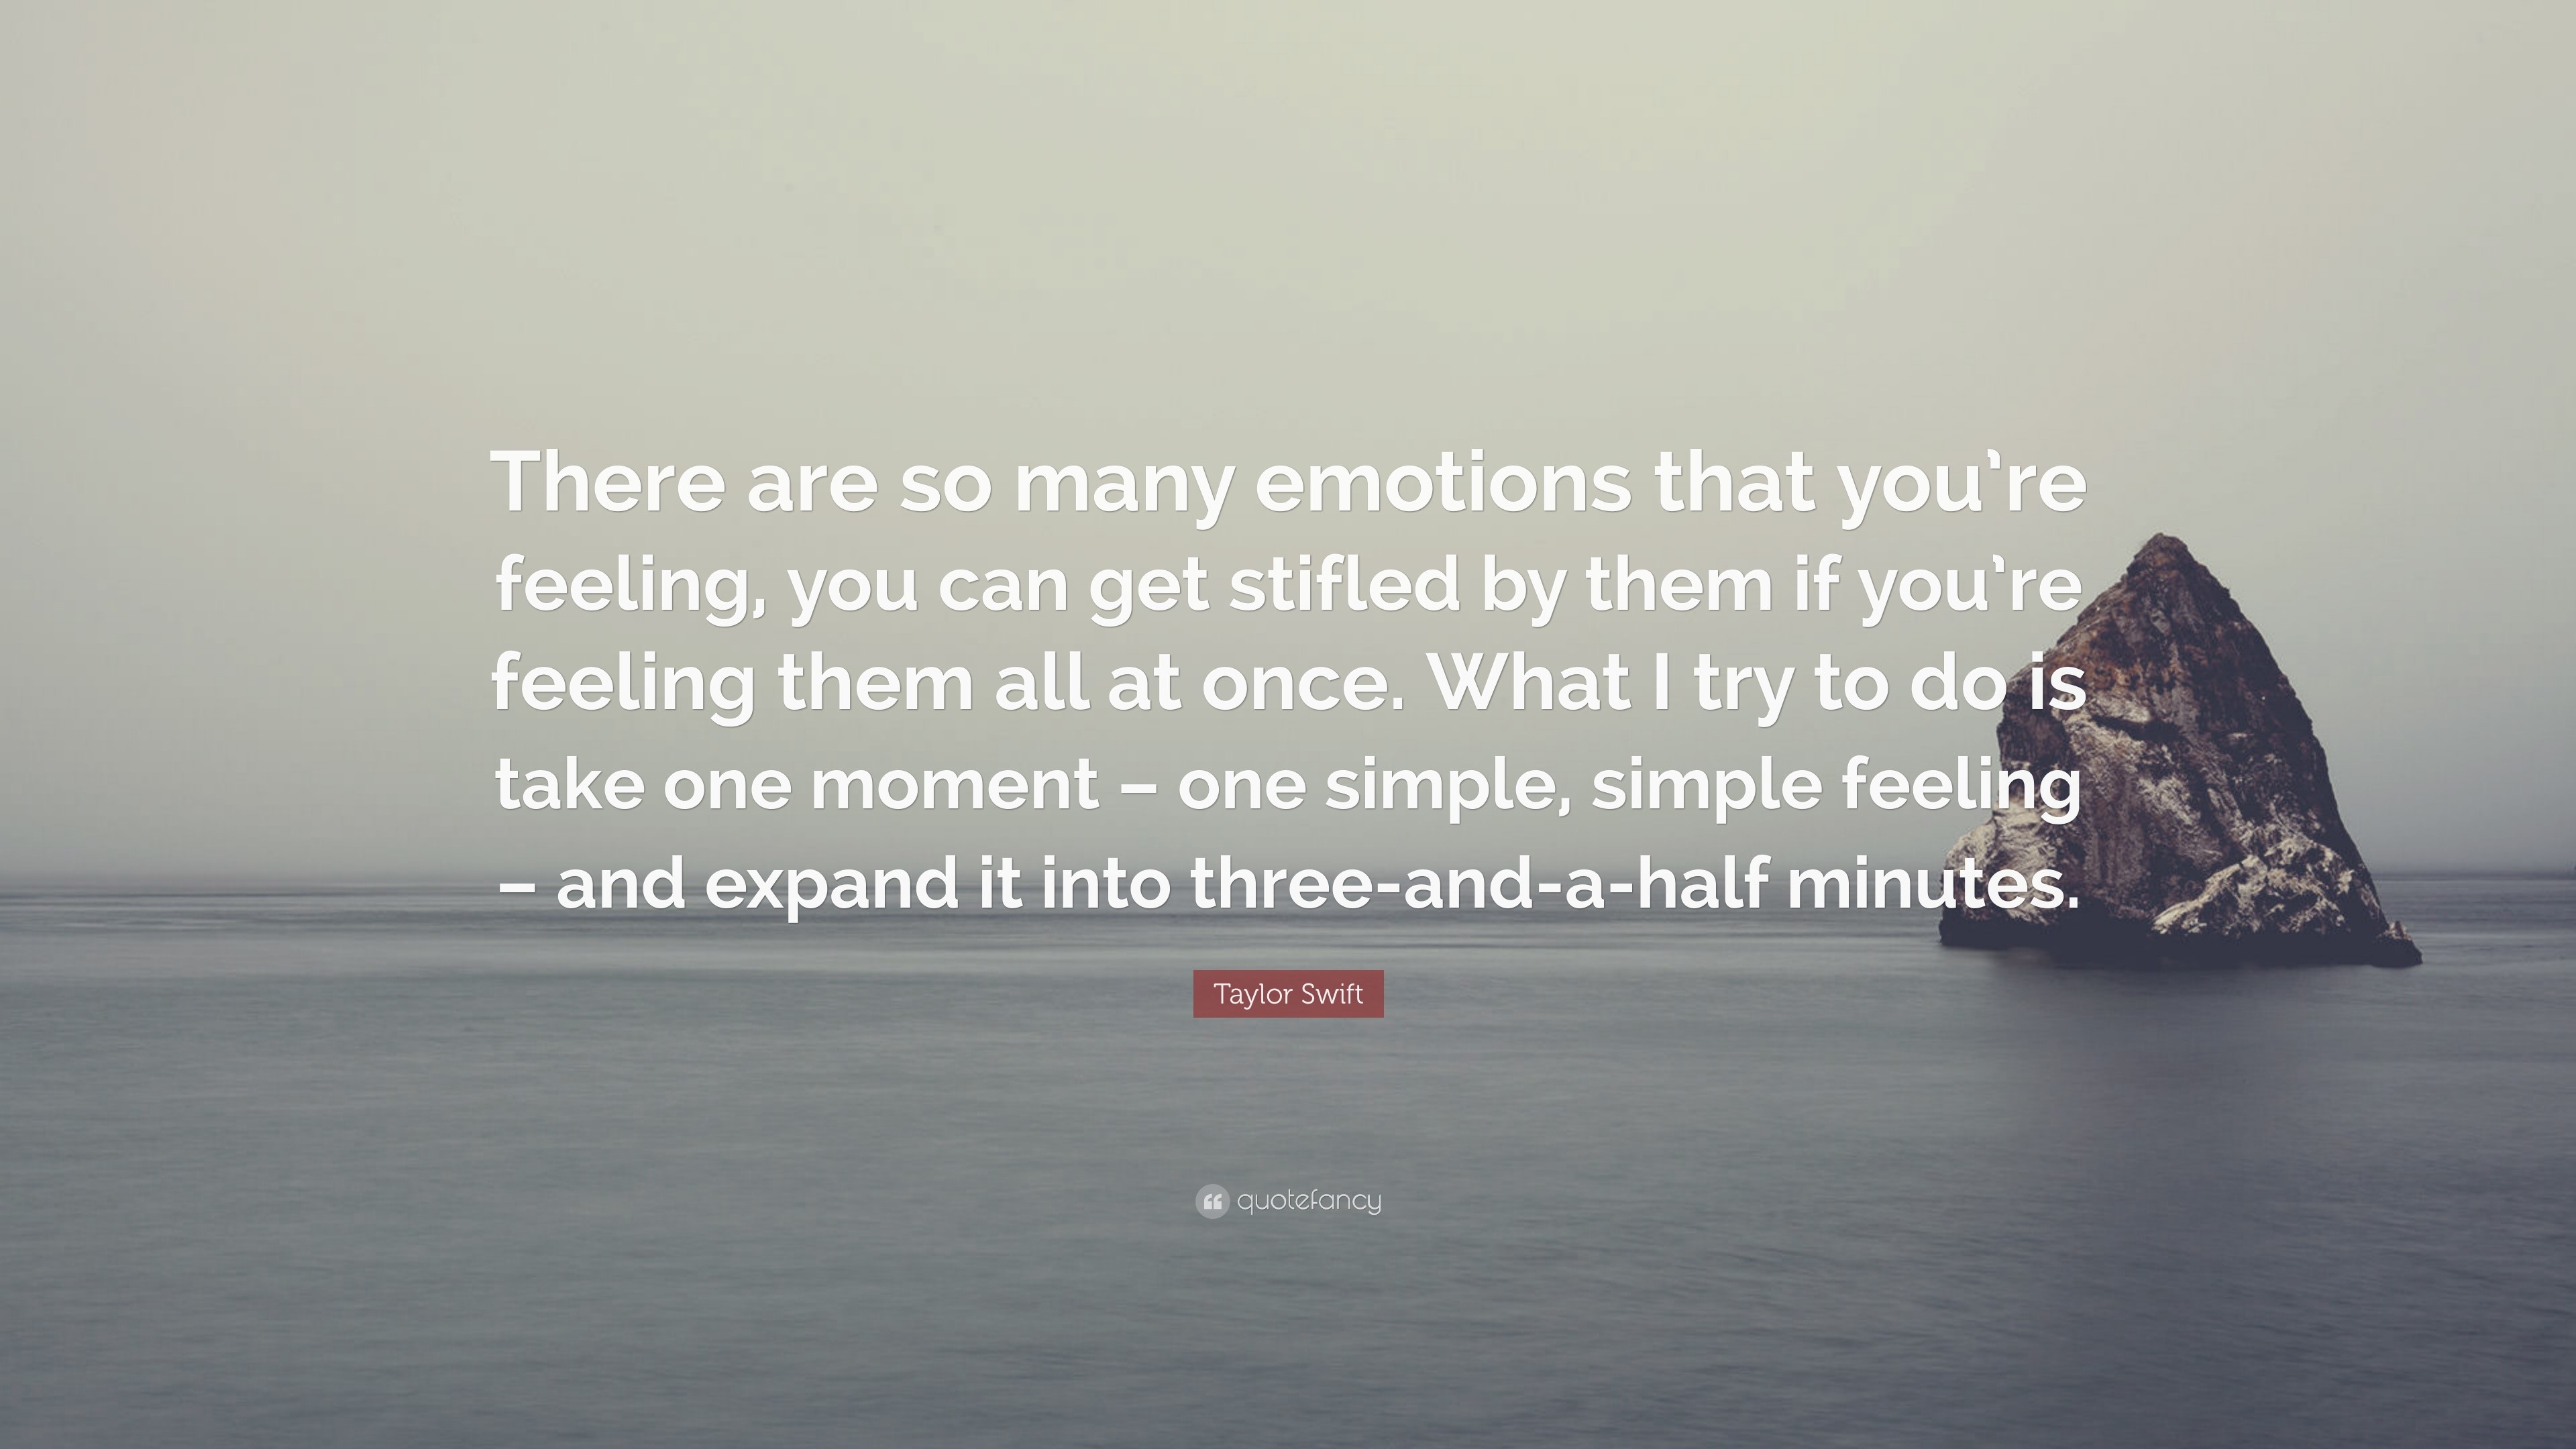 Taylor Swift Quote: “There are so many emotions that you’re feeling ...